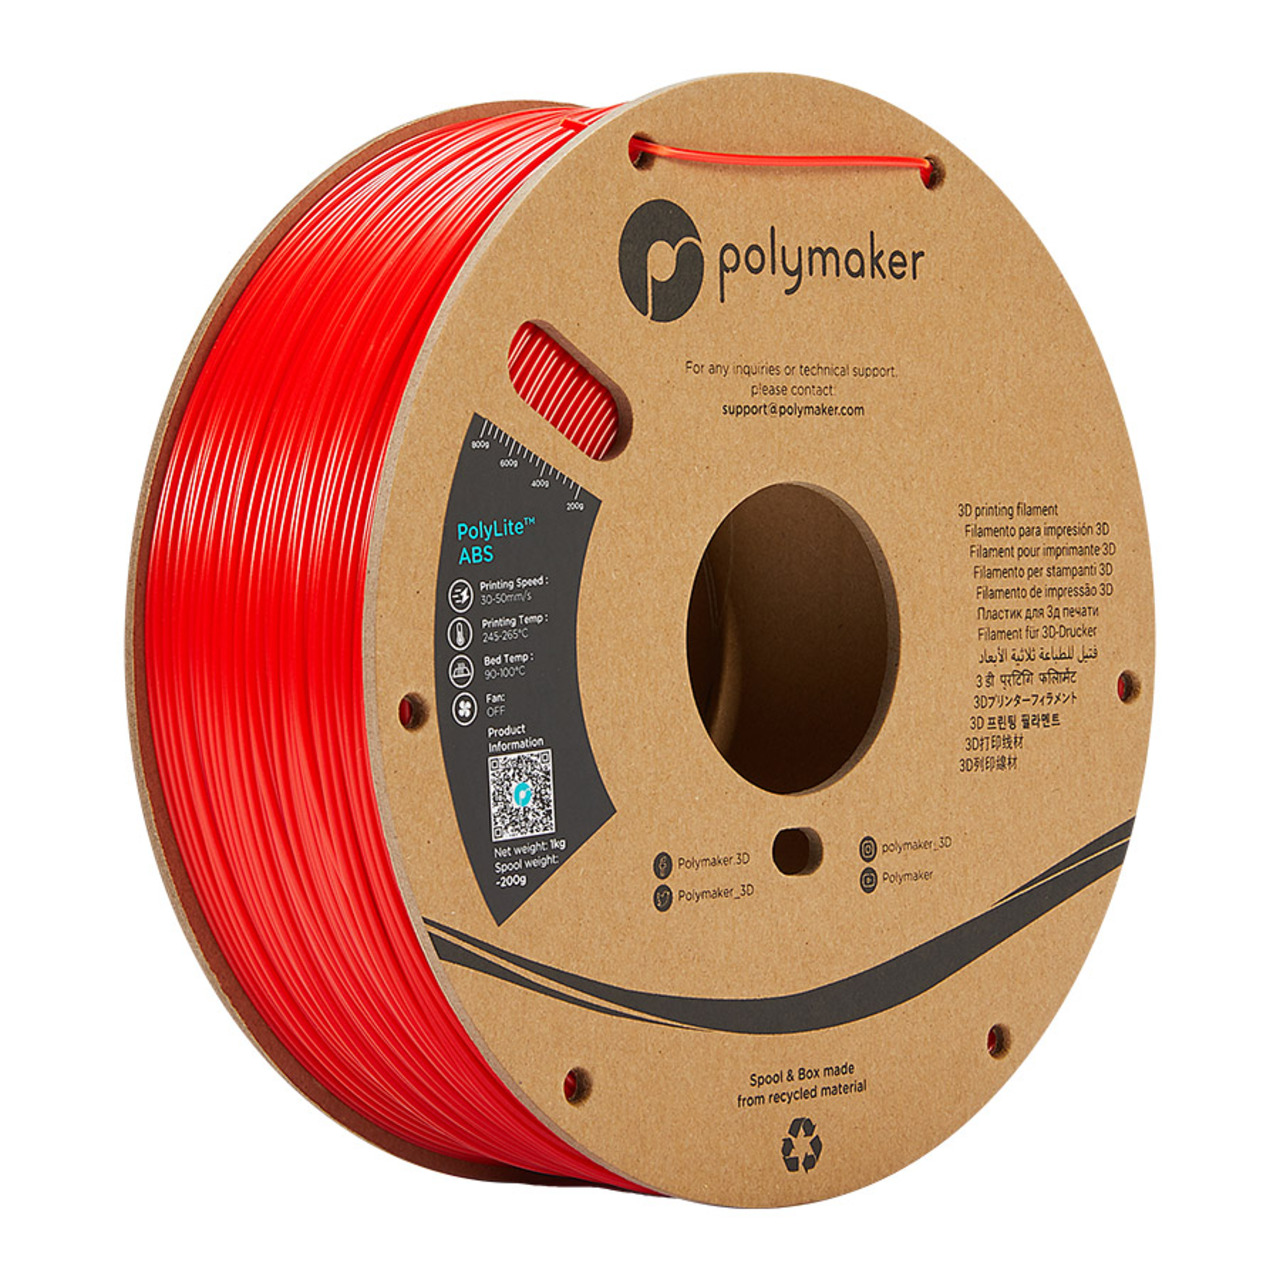 Polymaker ABS-Filament PolyLite- 1-75 mm- rot- 1 kg unter PC-Hardware